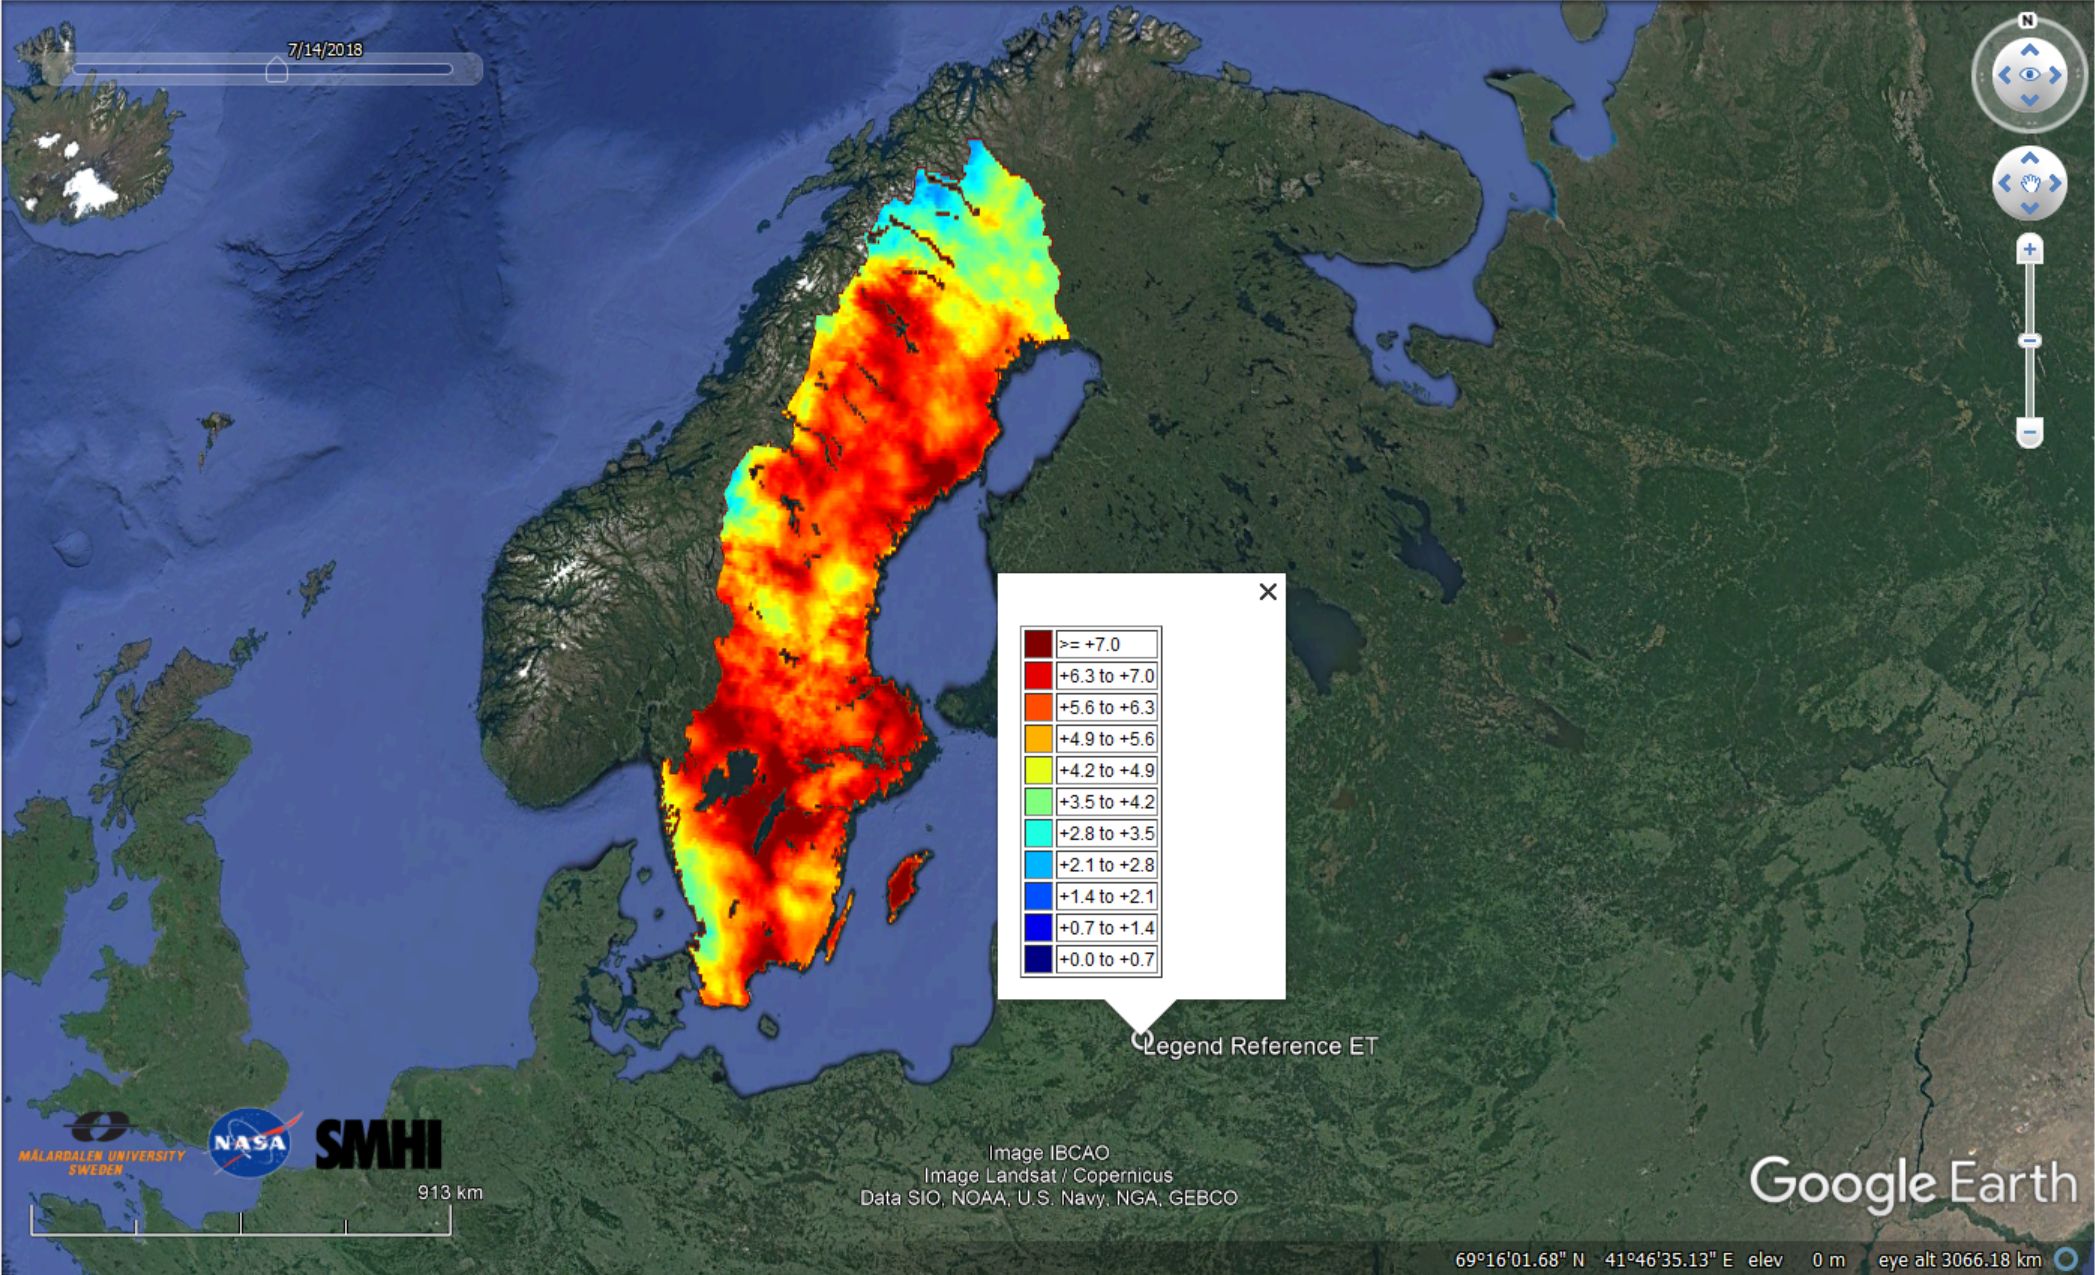 The image show the daily reference evapotranspiration all across Sweden the 7th of July 2018.